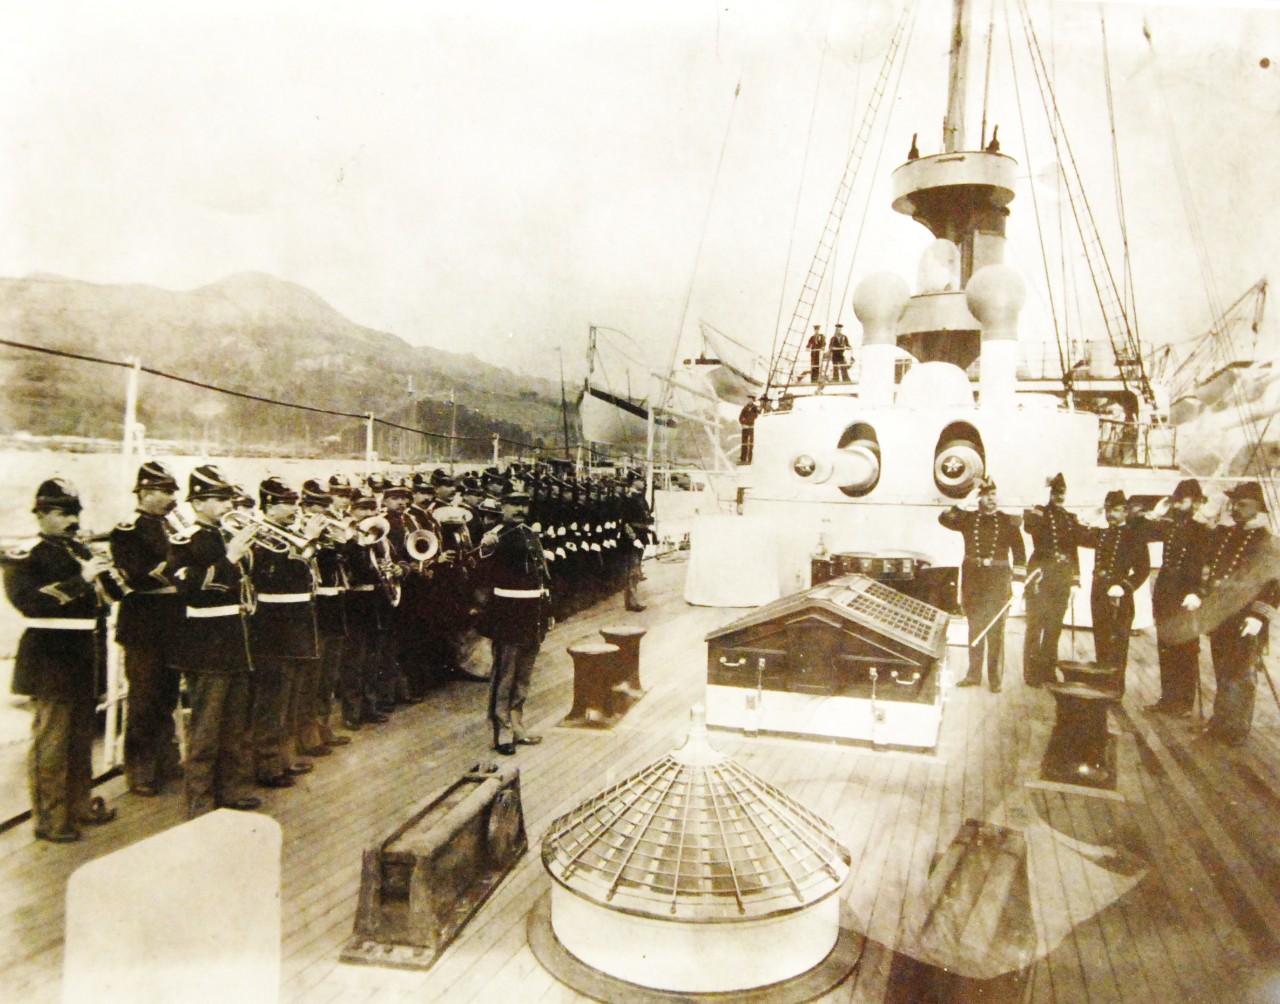 LC-J698-61254: USS Olympia (Cruiser #6), 1899.   Olympia band and ceremony on deck, circa 1899.  Photograph by Francis B. Johnston. Courtesy of the Library of Congress, Lot 8688.    (2015/5/15). 